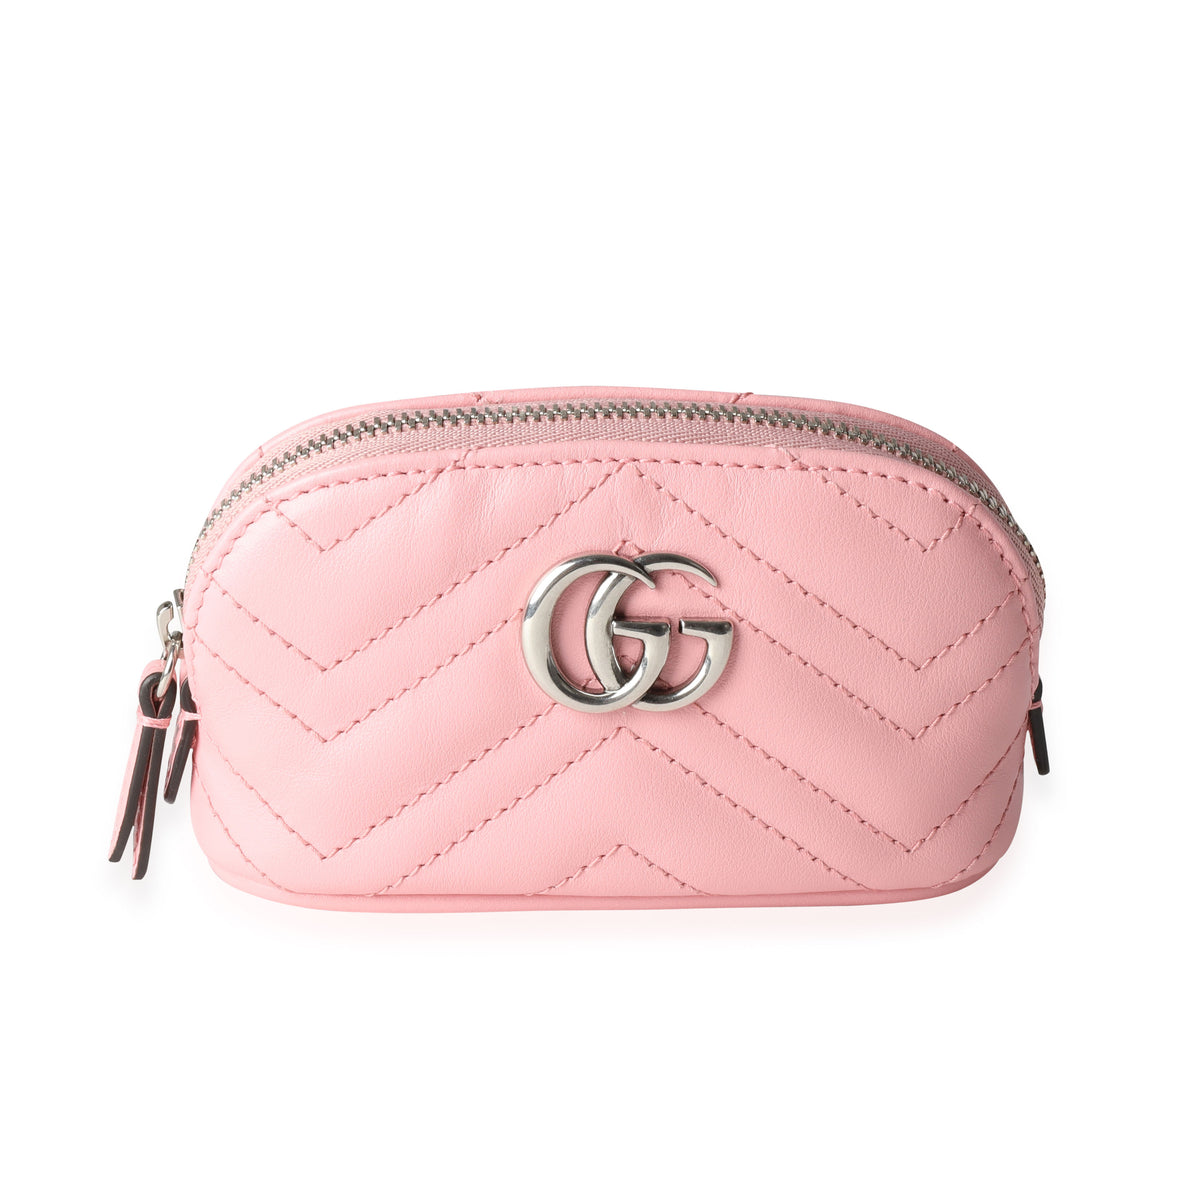 GG Marmont leather key case in Beige Pink GG Canvas Leather